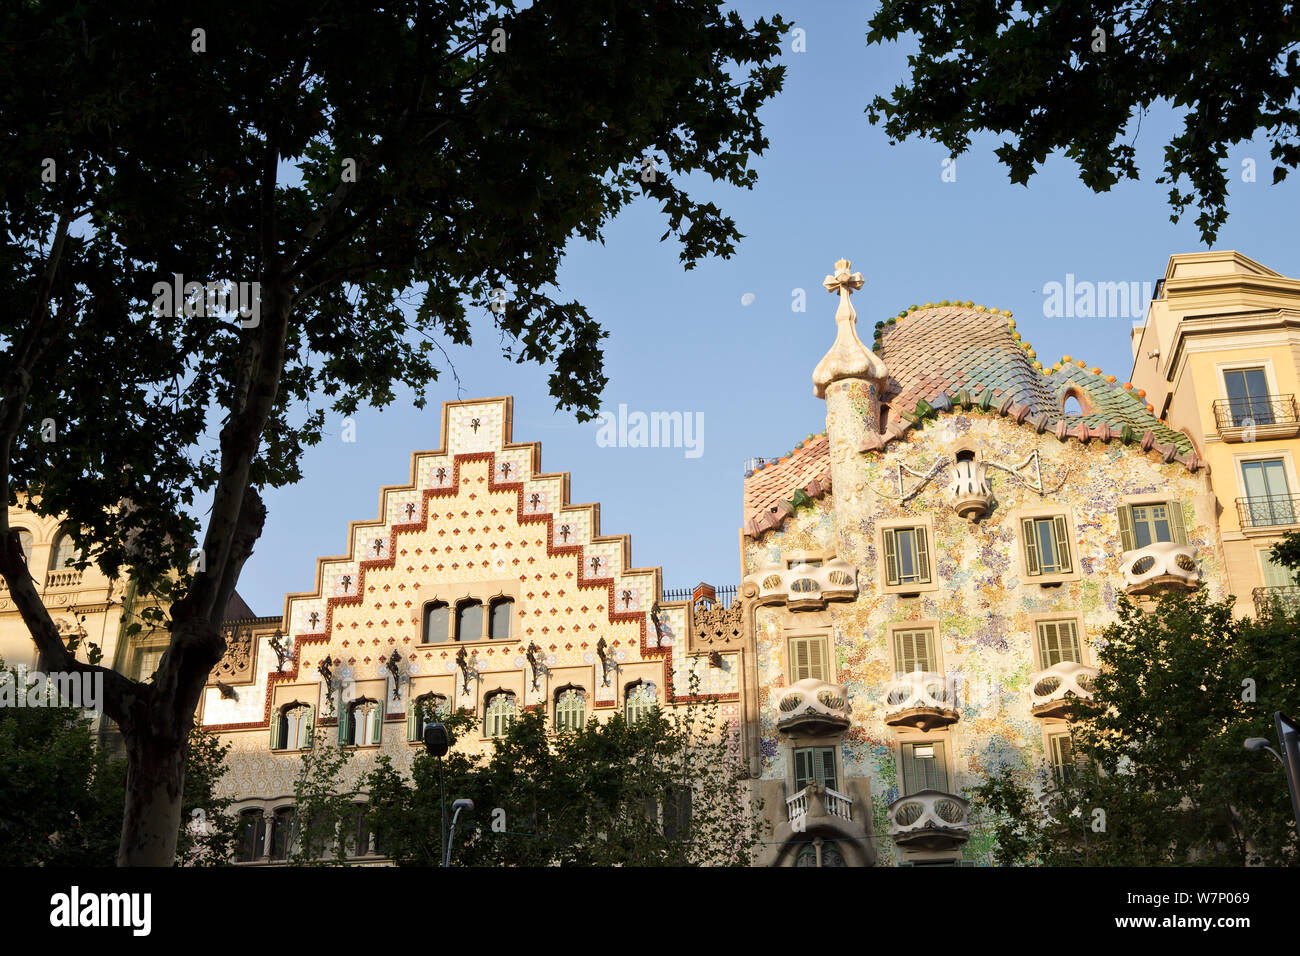 Two modernist buildings : left, Casa Amatller by architect Puig i Cadafalch and Casa Batll on the right by architect Antoni Gaudi, with tree in the foreground, Eixample District, Barcelona City, Spain, July 2010 Stock Photo